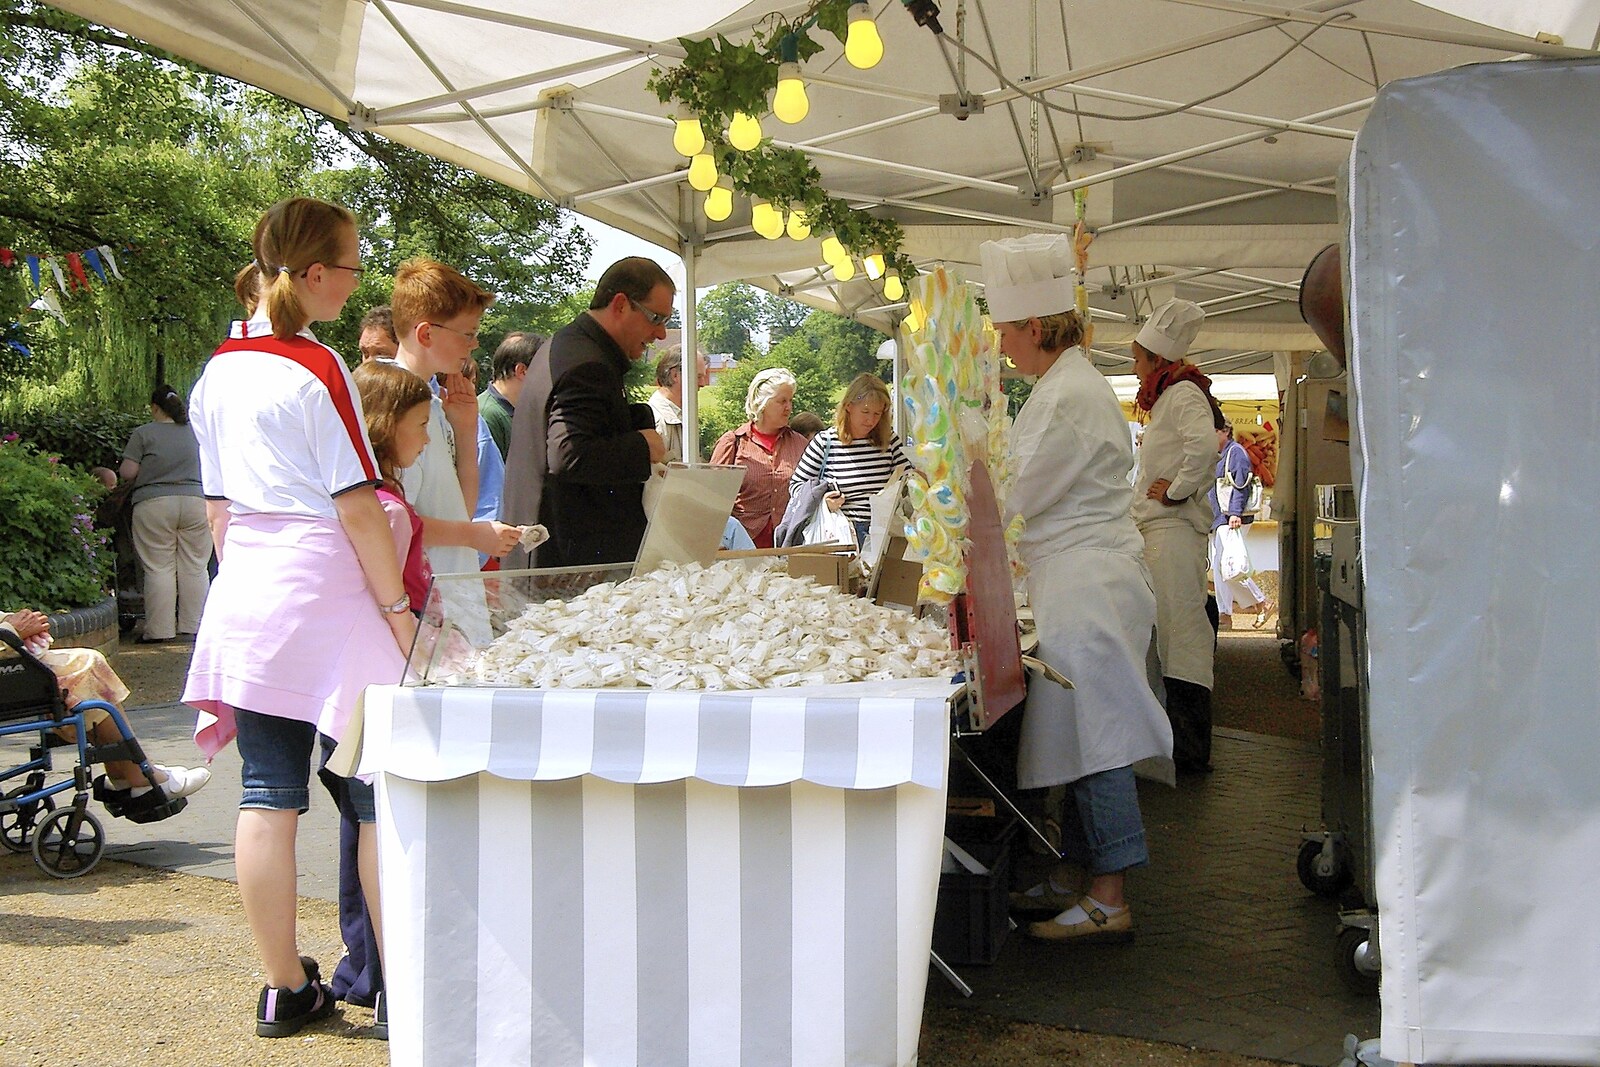 People throng a confectionery stall from A French Market Visits, Diss, Norfolk - 24th June 2006